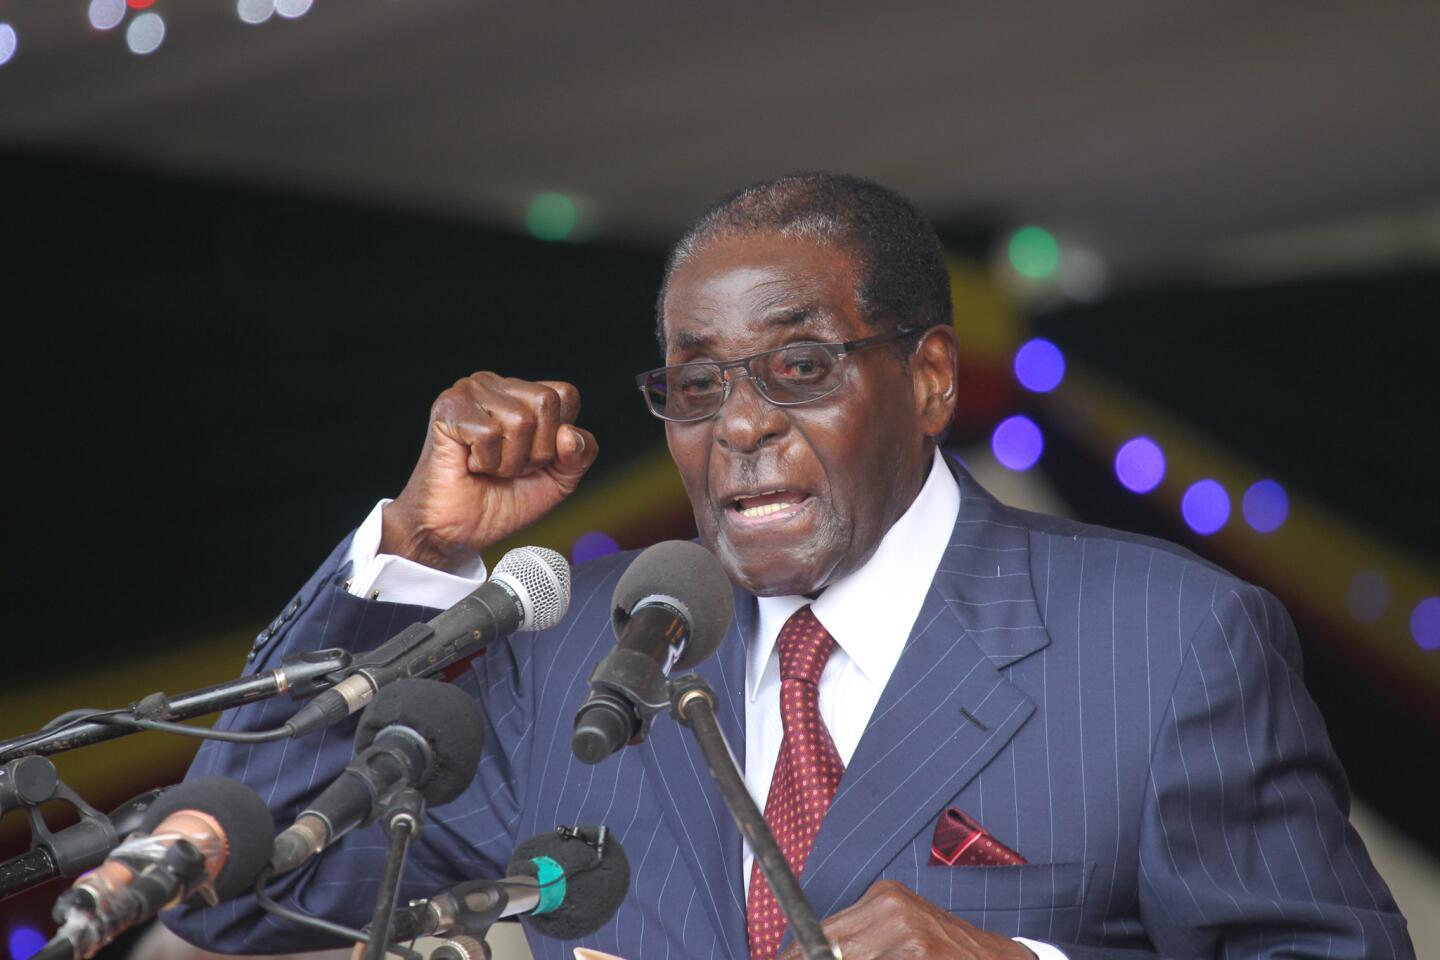 When Robert Mugabe took over as Zimbabwean president in 1980, he was celebrated as a hero in the liberation war against Britain. But after international sanctions, a series of fraudulent elections and an economic collapse sparked by the seizure of white-owned farms, Mugabe become a pariah and retired in 2017 rather than face impeachment. He was 95.